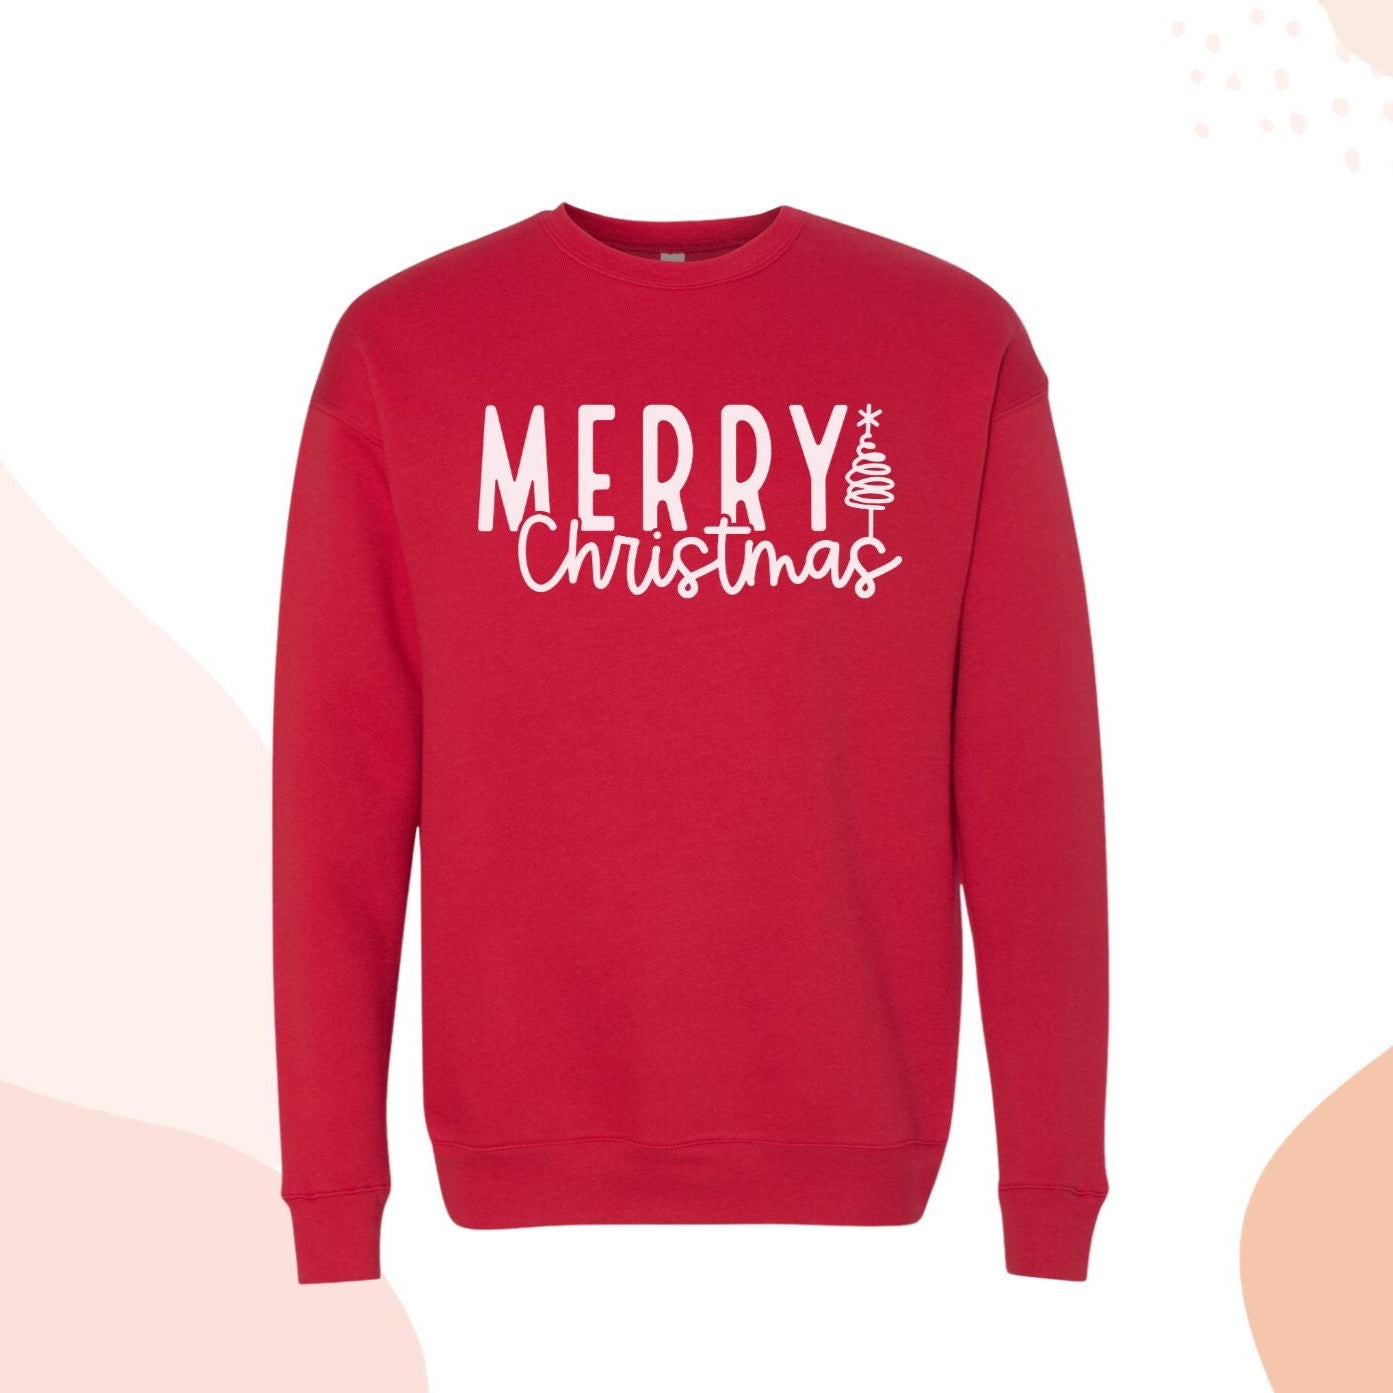 Red Merry Chrstmas Tree Sweatshirt for Her, Crewneck Sweater for Mom Teen Girl, Jumper Shirt Red